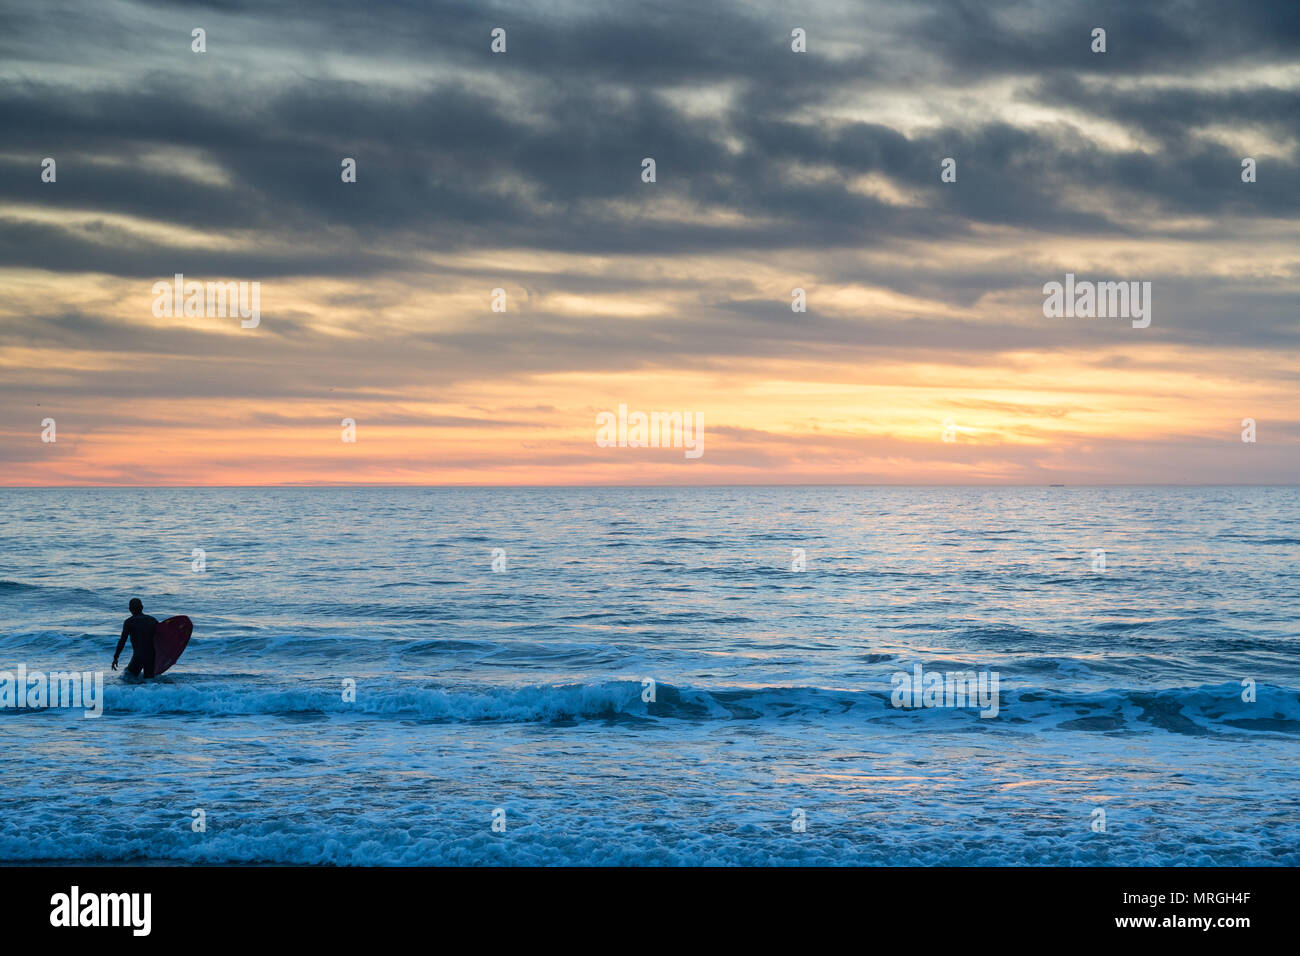 A longboard surfer walks into the ocean in Manhattan Beach, California on a cloudy day, ready to get a few waves before dark. Stock Photo